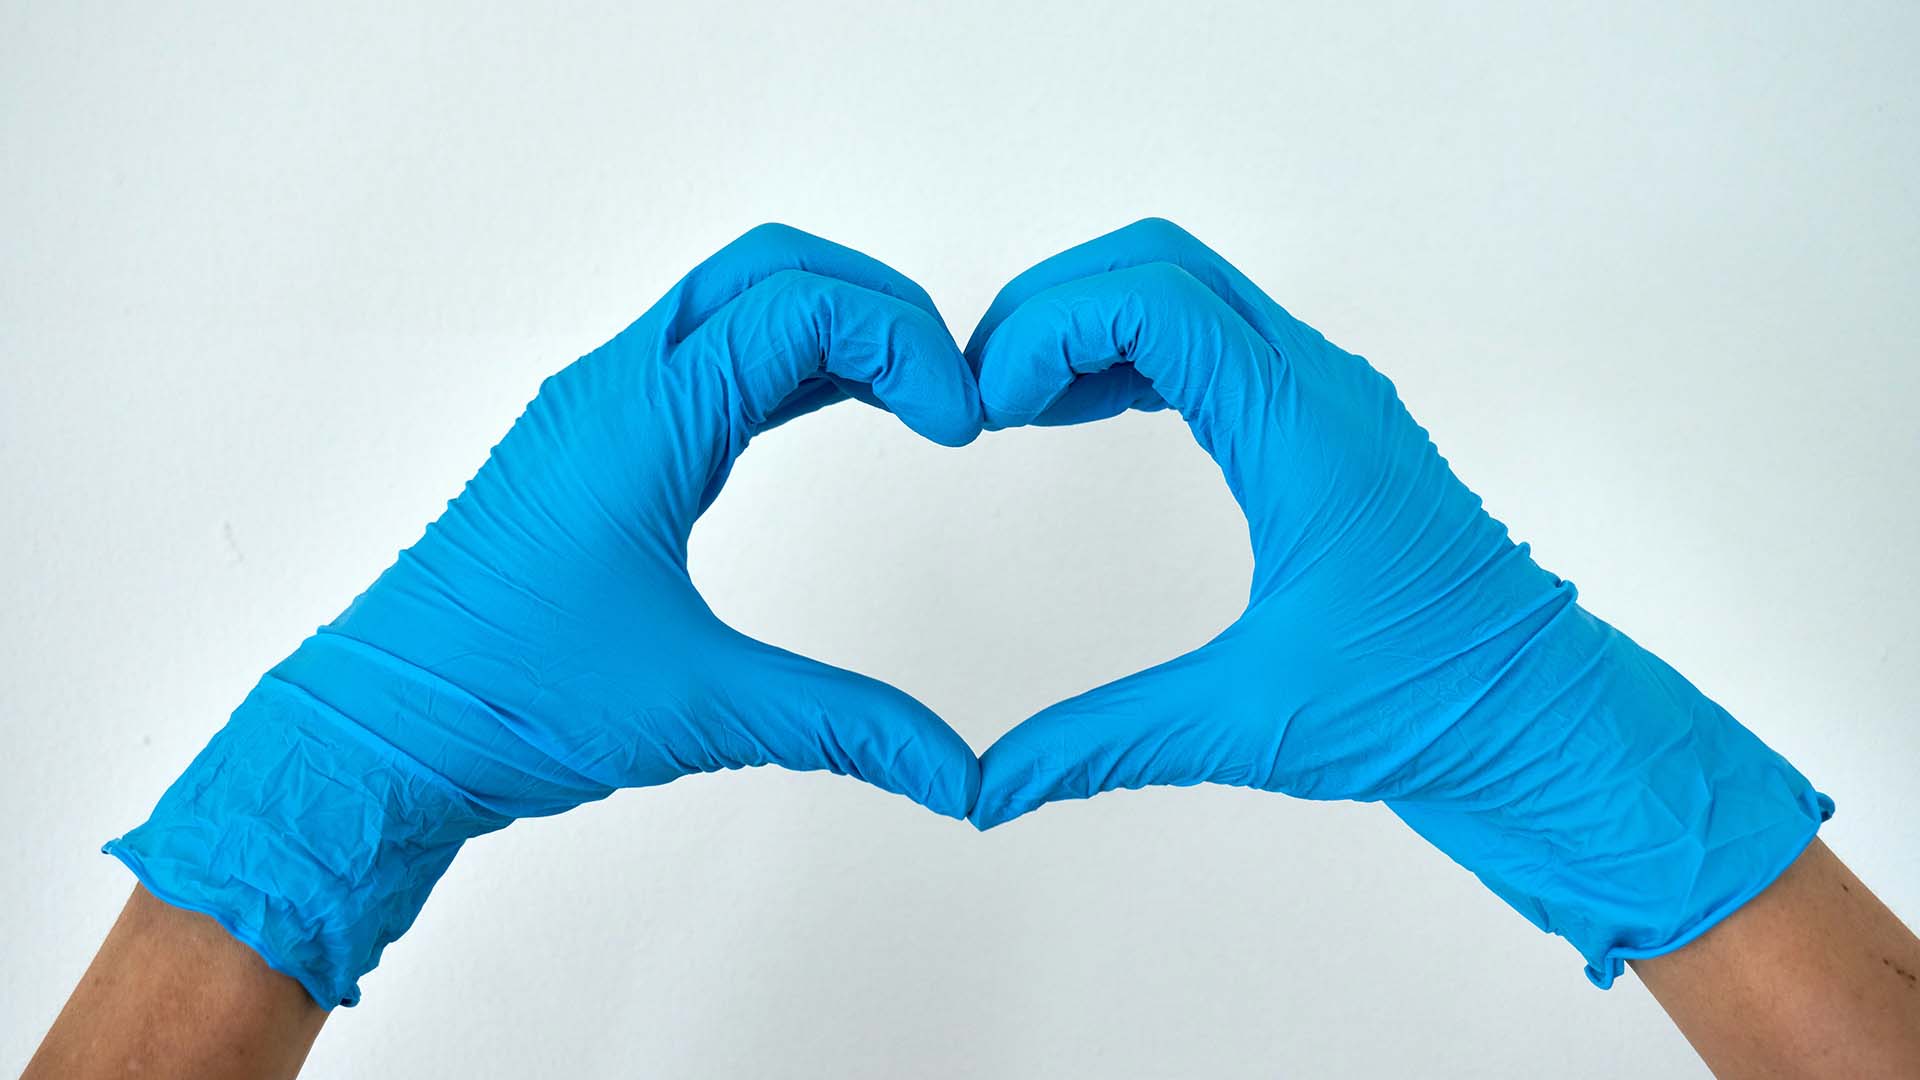 Hands in blue disposable gloves making a heart